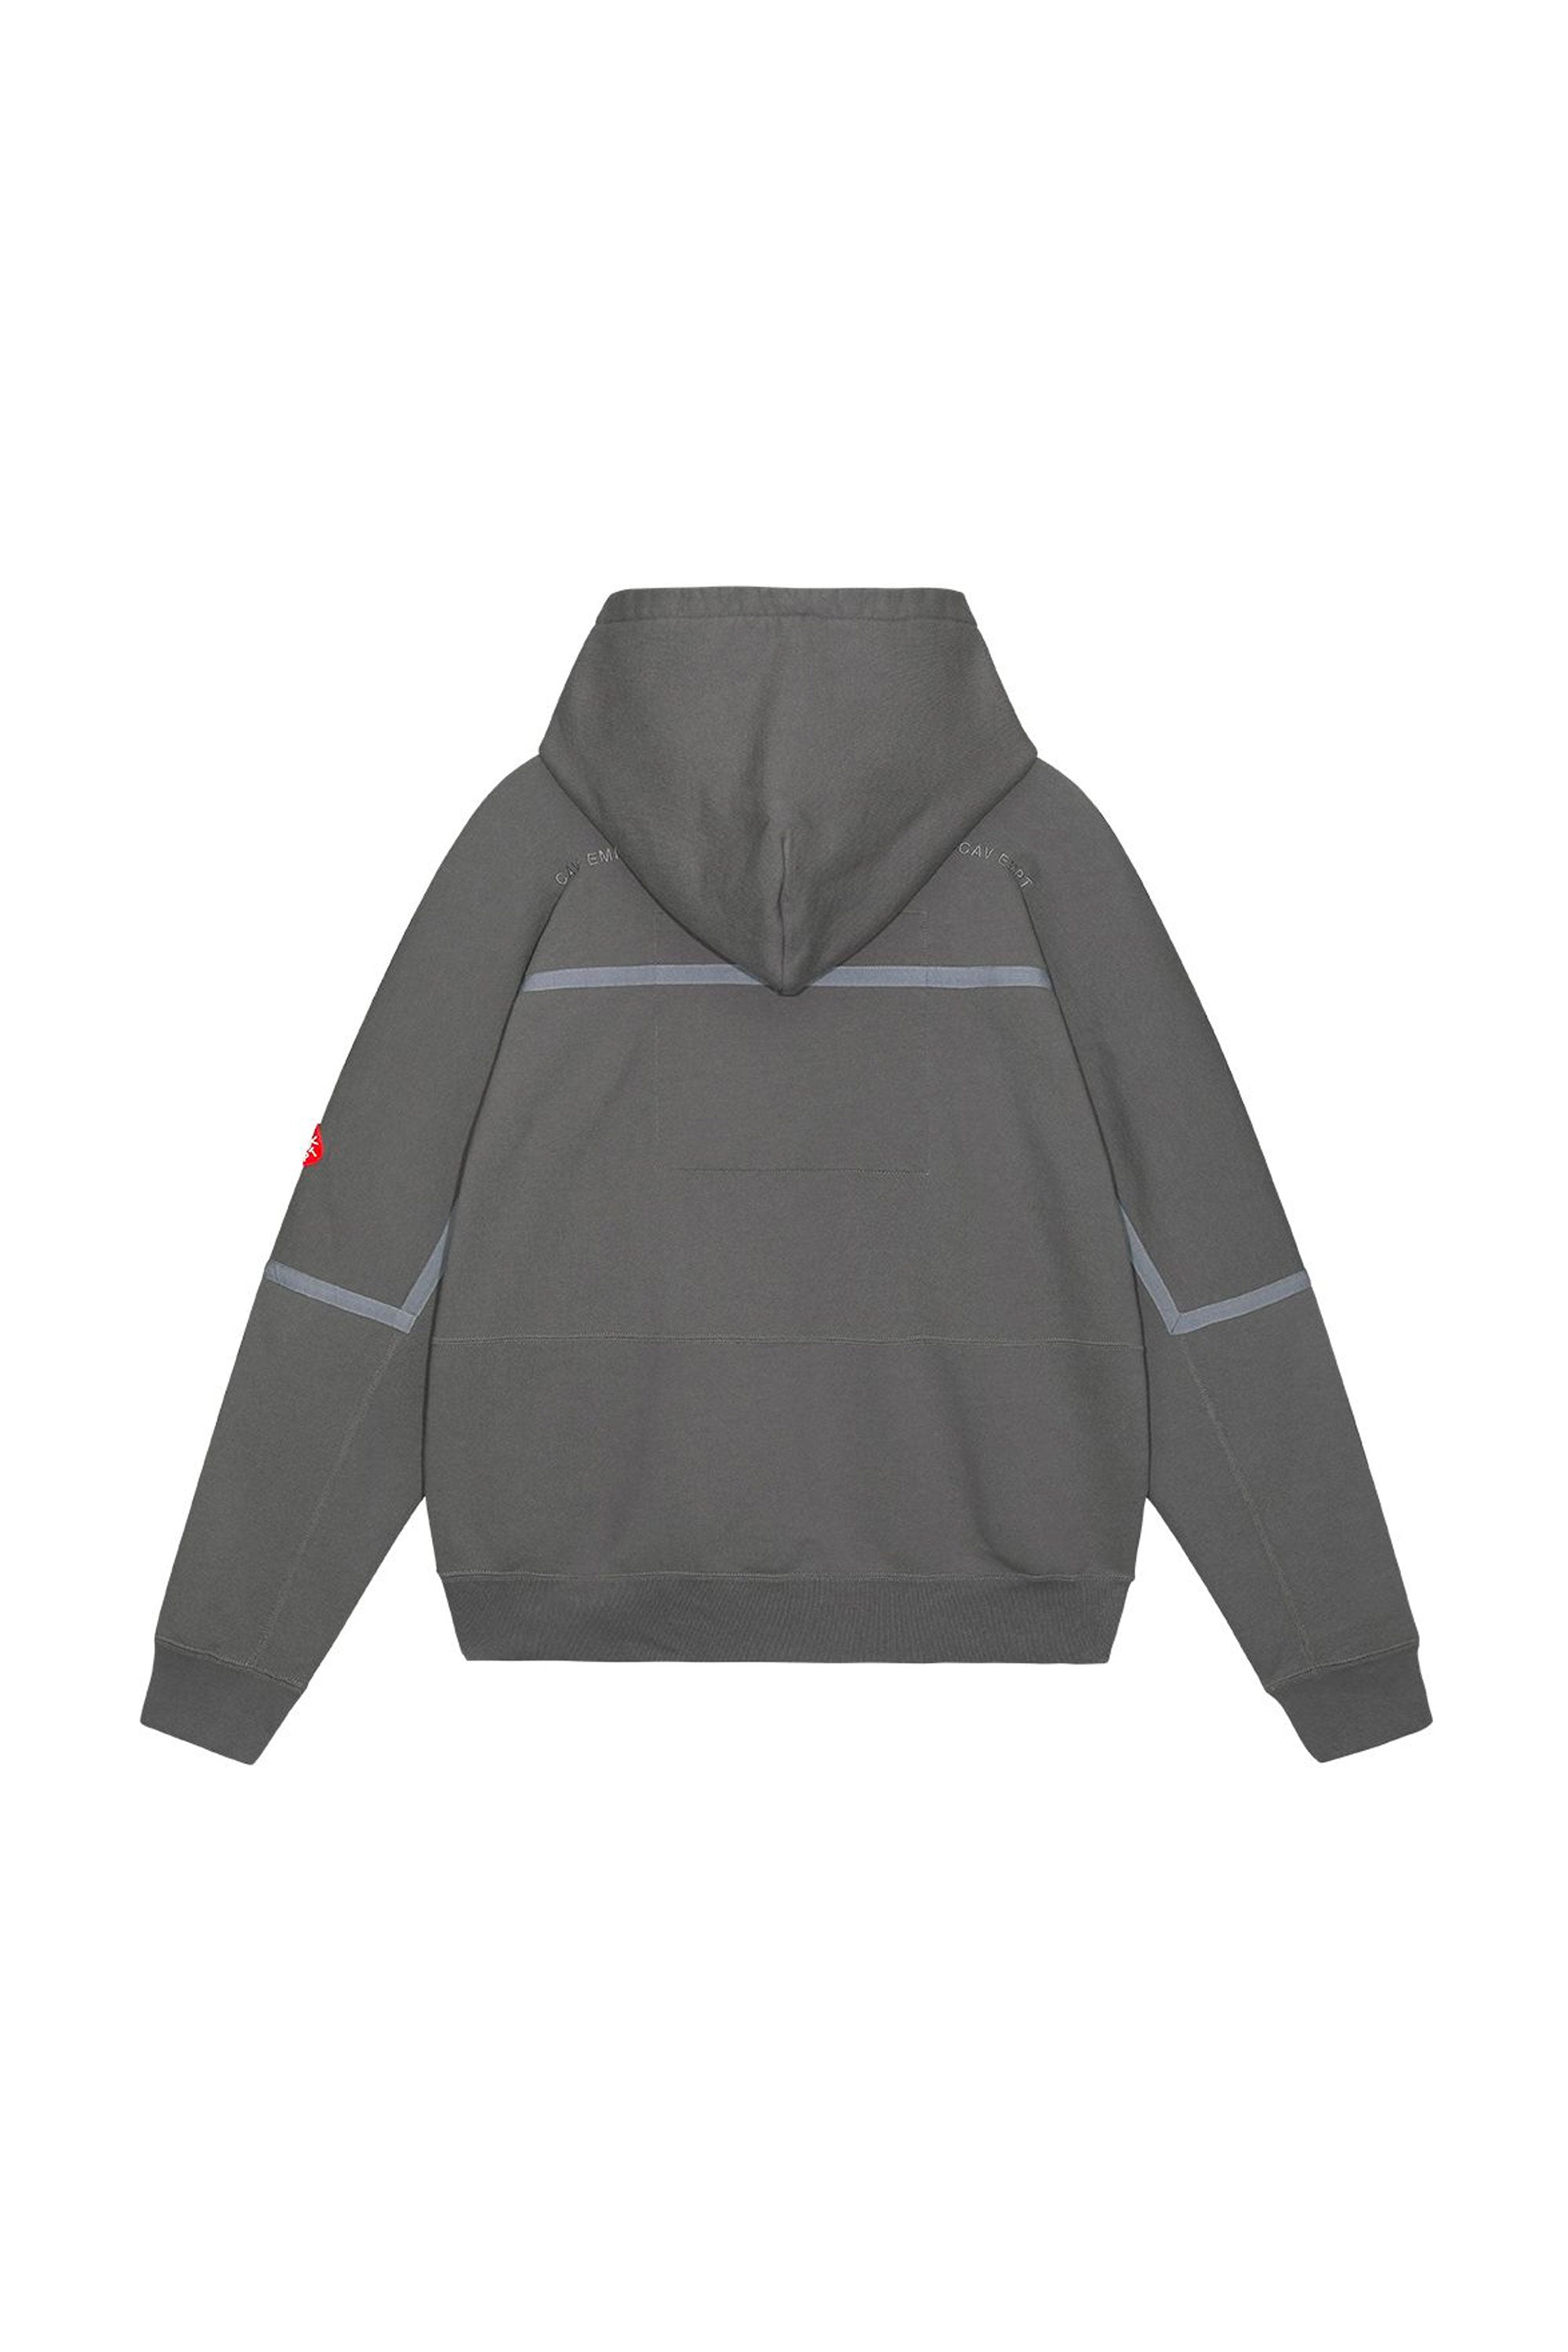 The CAV EMPT - TAPED CUT HEAVY HOODY  available online with global shipping, and in PAM Stores Melbourne and Sydney.